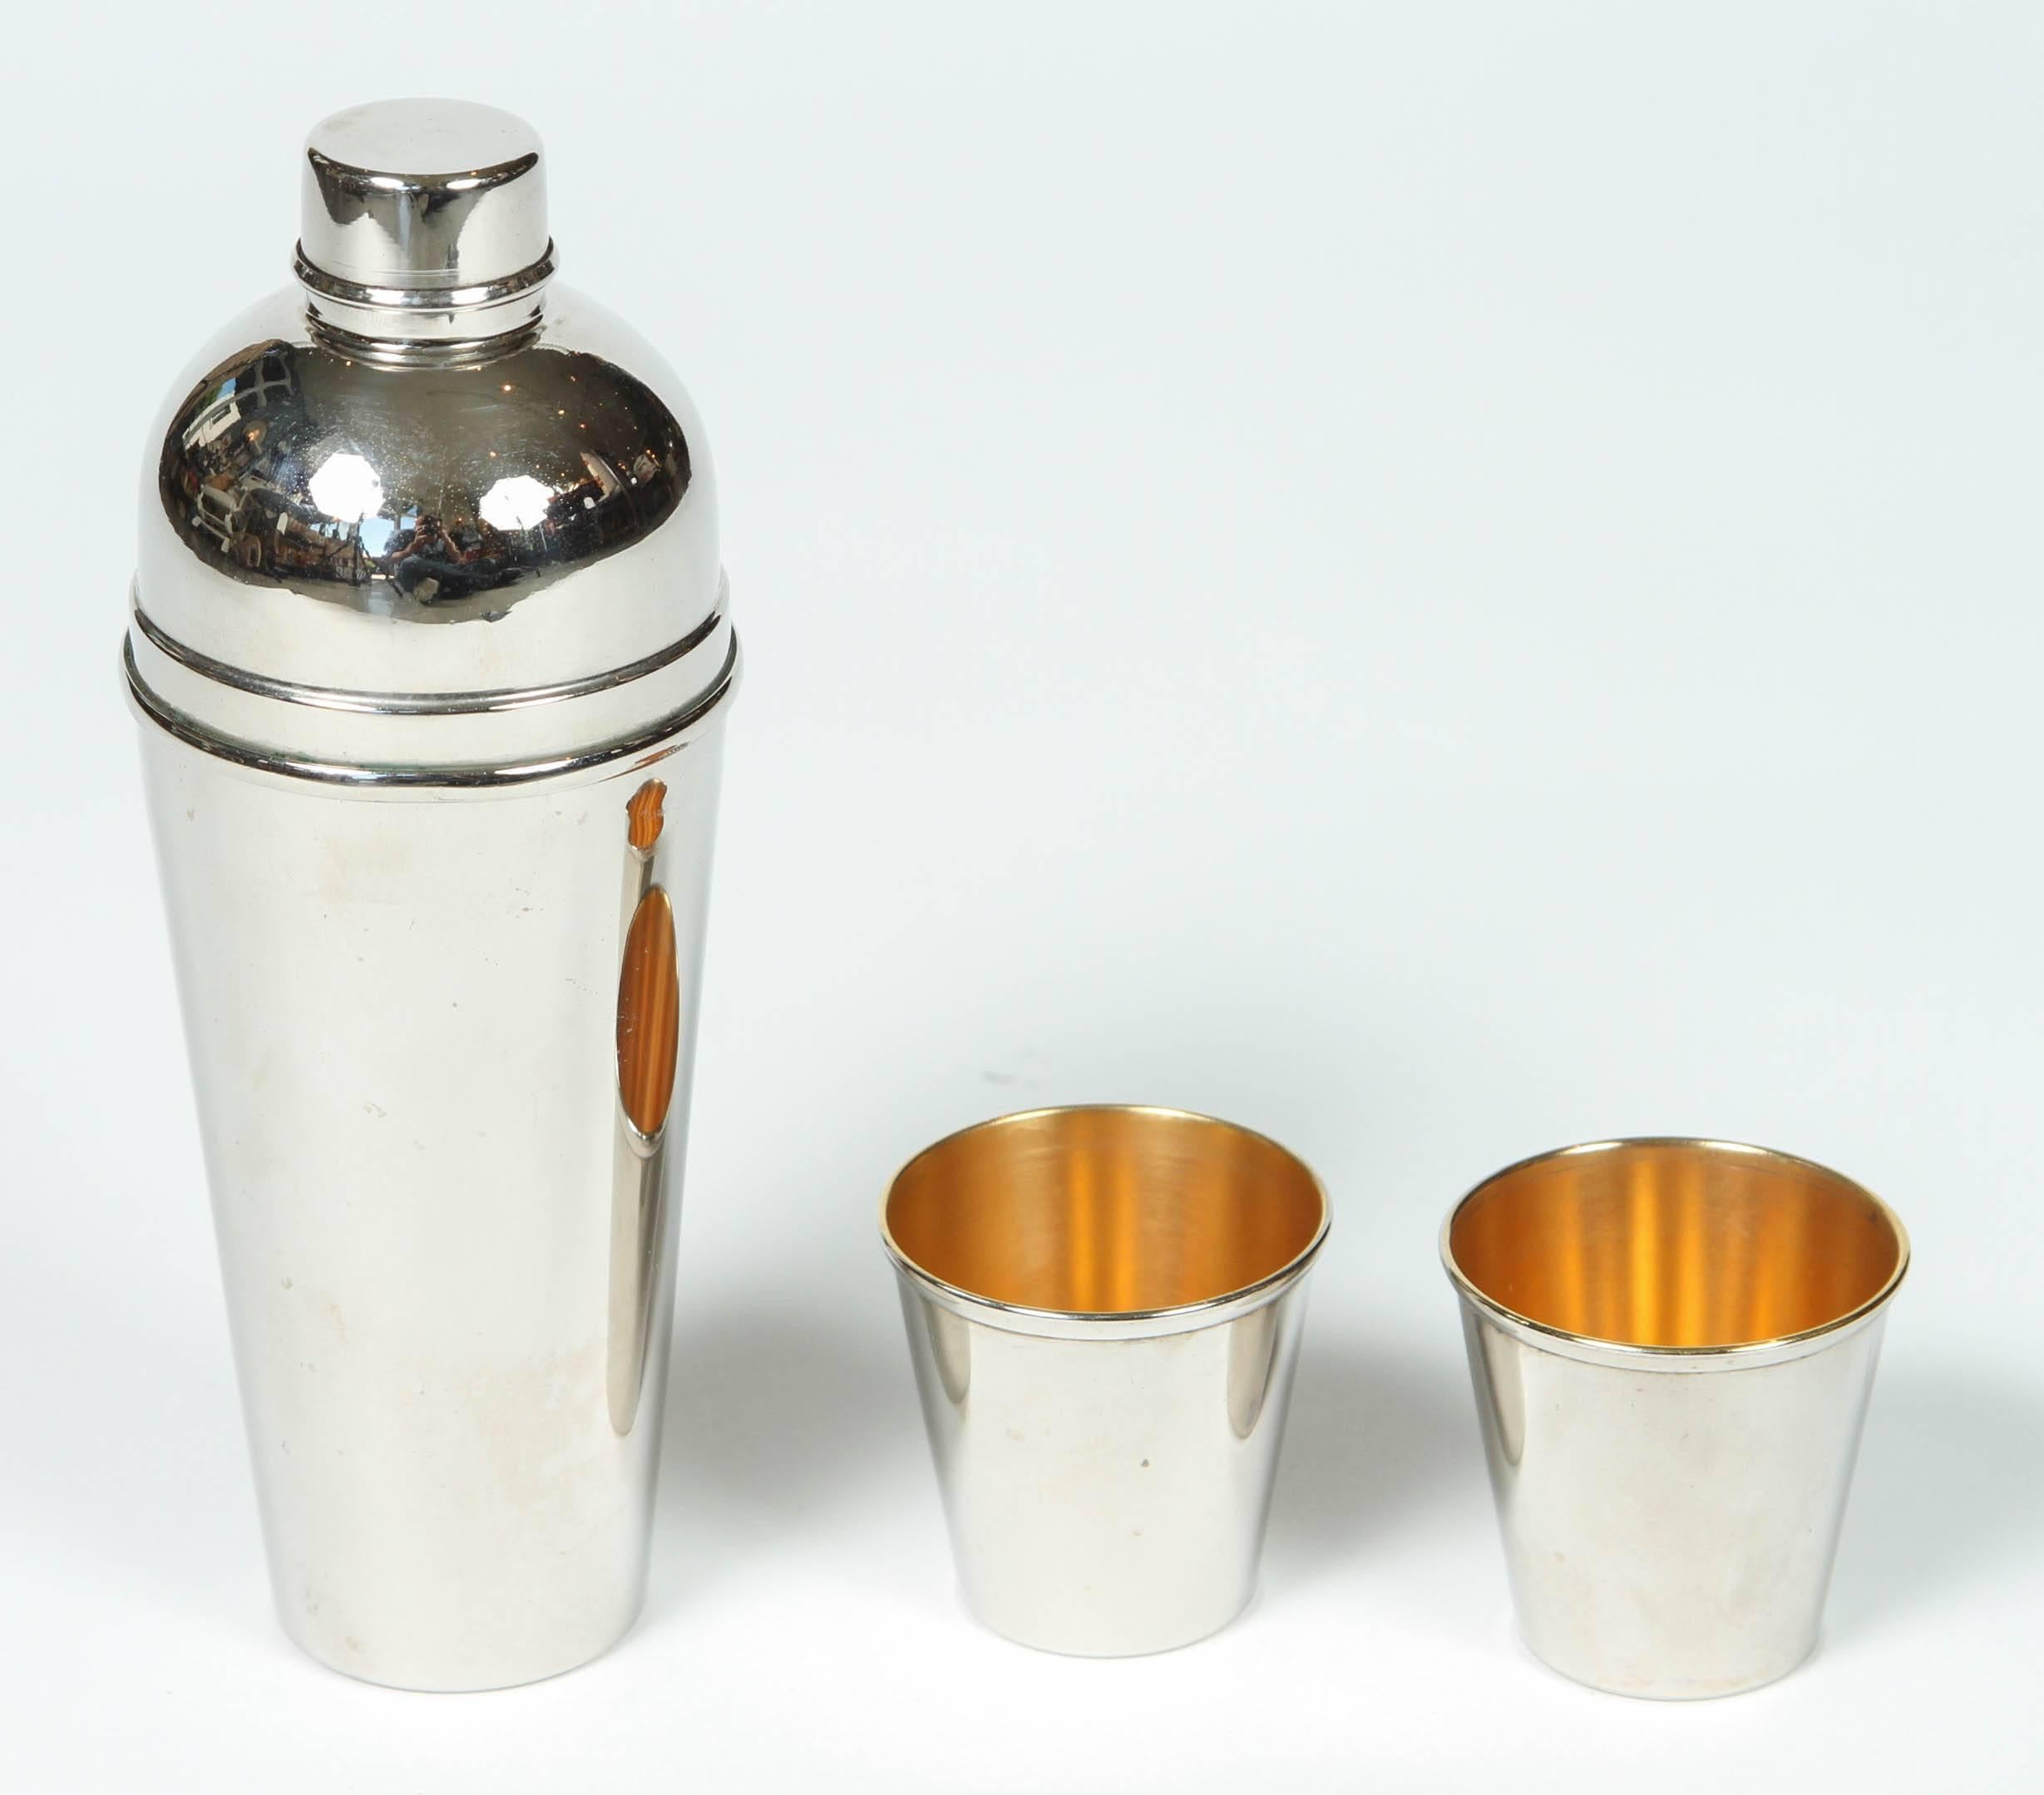 Vintage stainless traveling cocktail shaker with two cups which all fits inside a leather case. Stamped under cups, made in Canada.

Shaker measures: 7.25